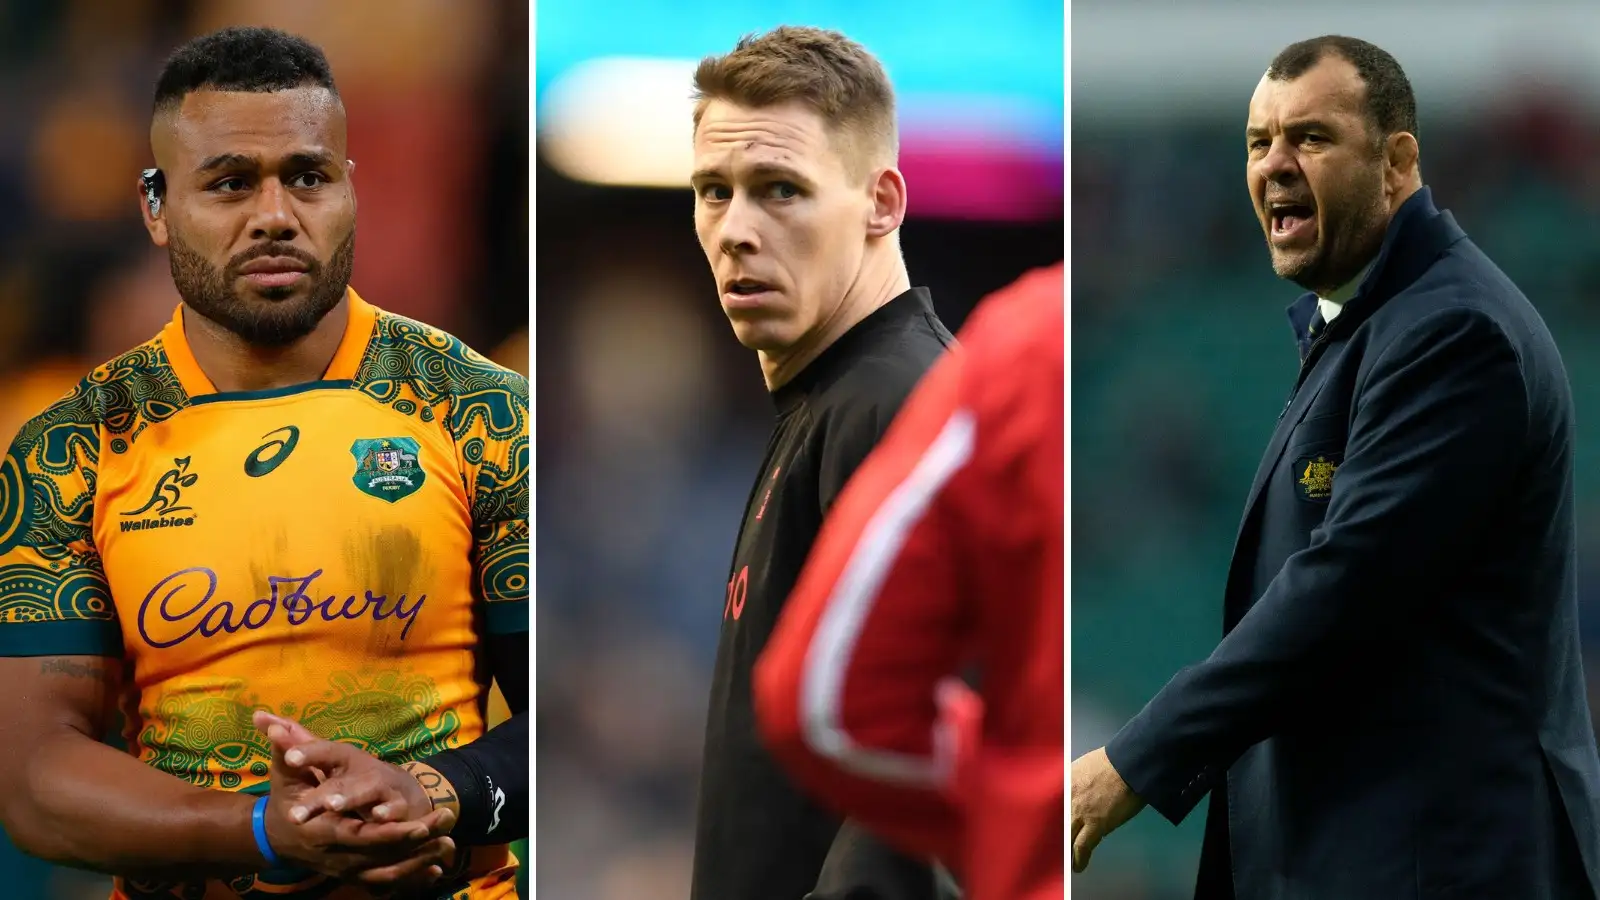 rugby rumours and transfers: Planet Rugby recaps some of the biggest rugby transfers news, rugby rumours and movements in the world of rugby union over the past week. including Samu Kerevi, coaches around the world, Wales stars, and much more.